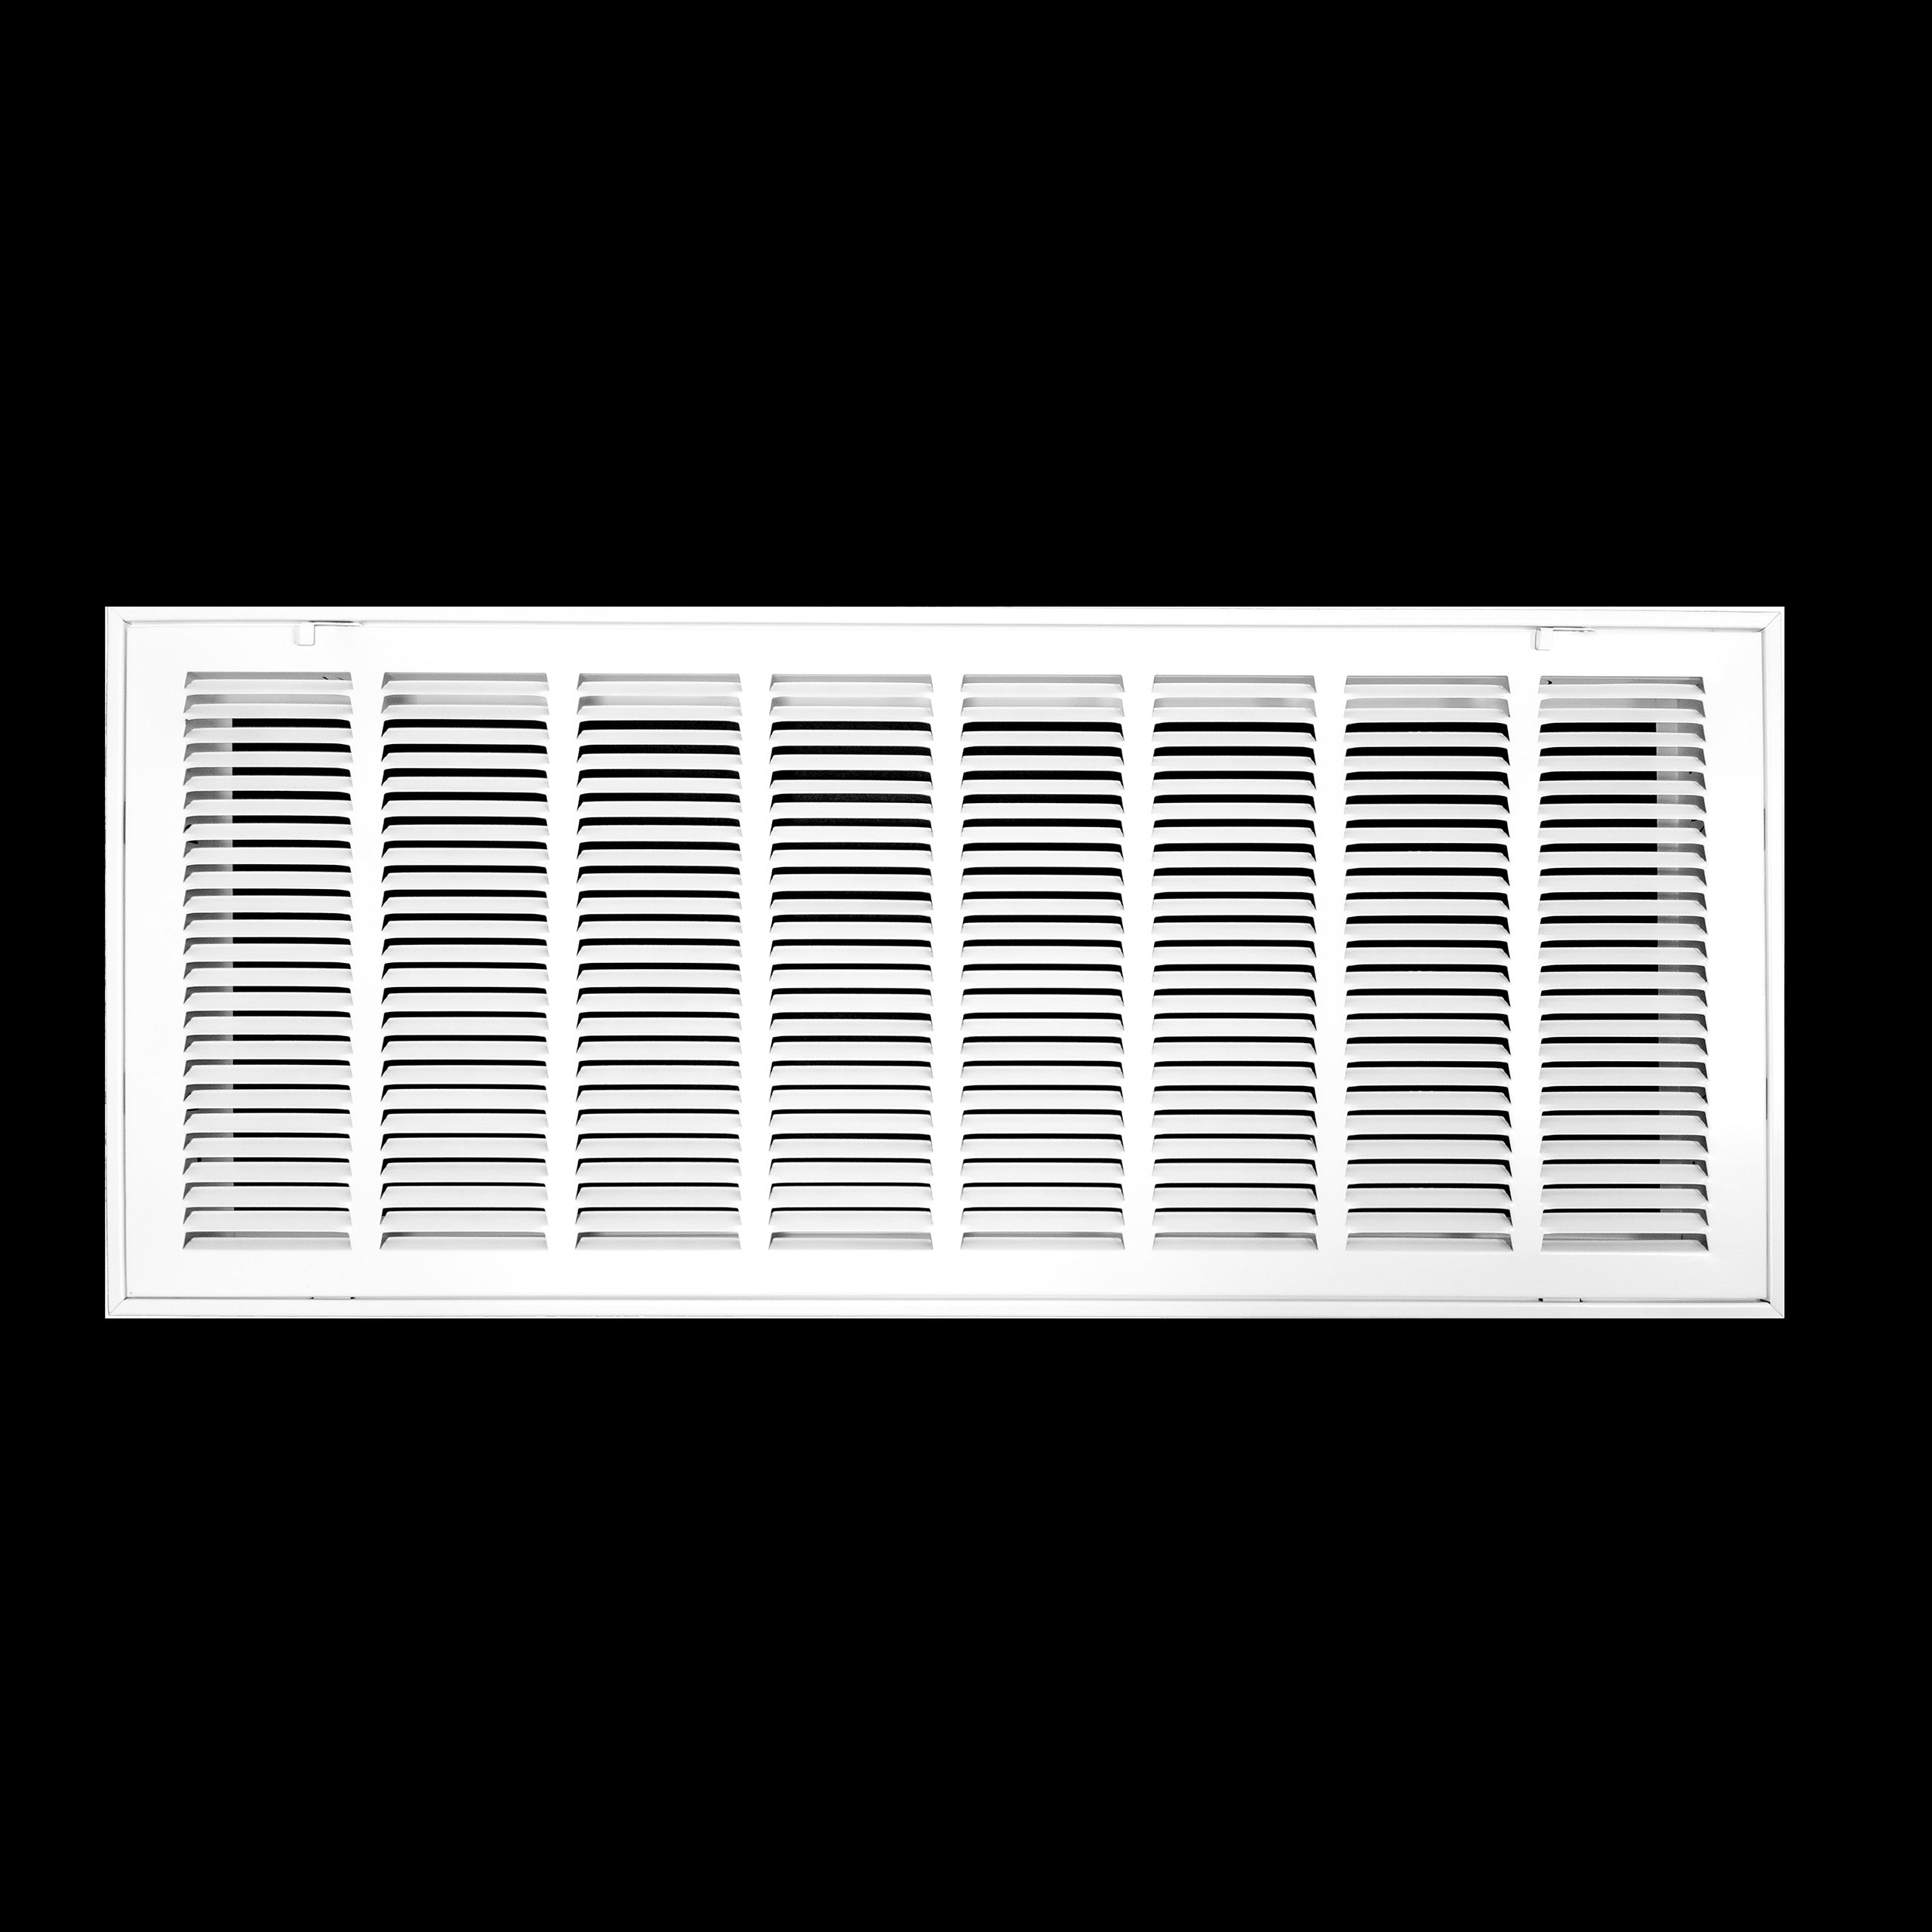 airgrilles 32" x 12" duct opening hd steel return air filter grille for sidewall and ceiling 7hnd-rfg1-wh-32x12 038775638326 1